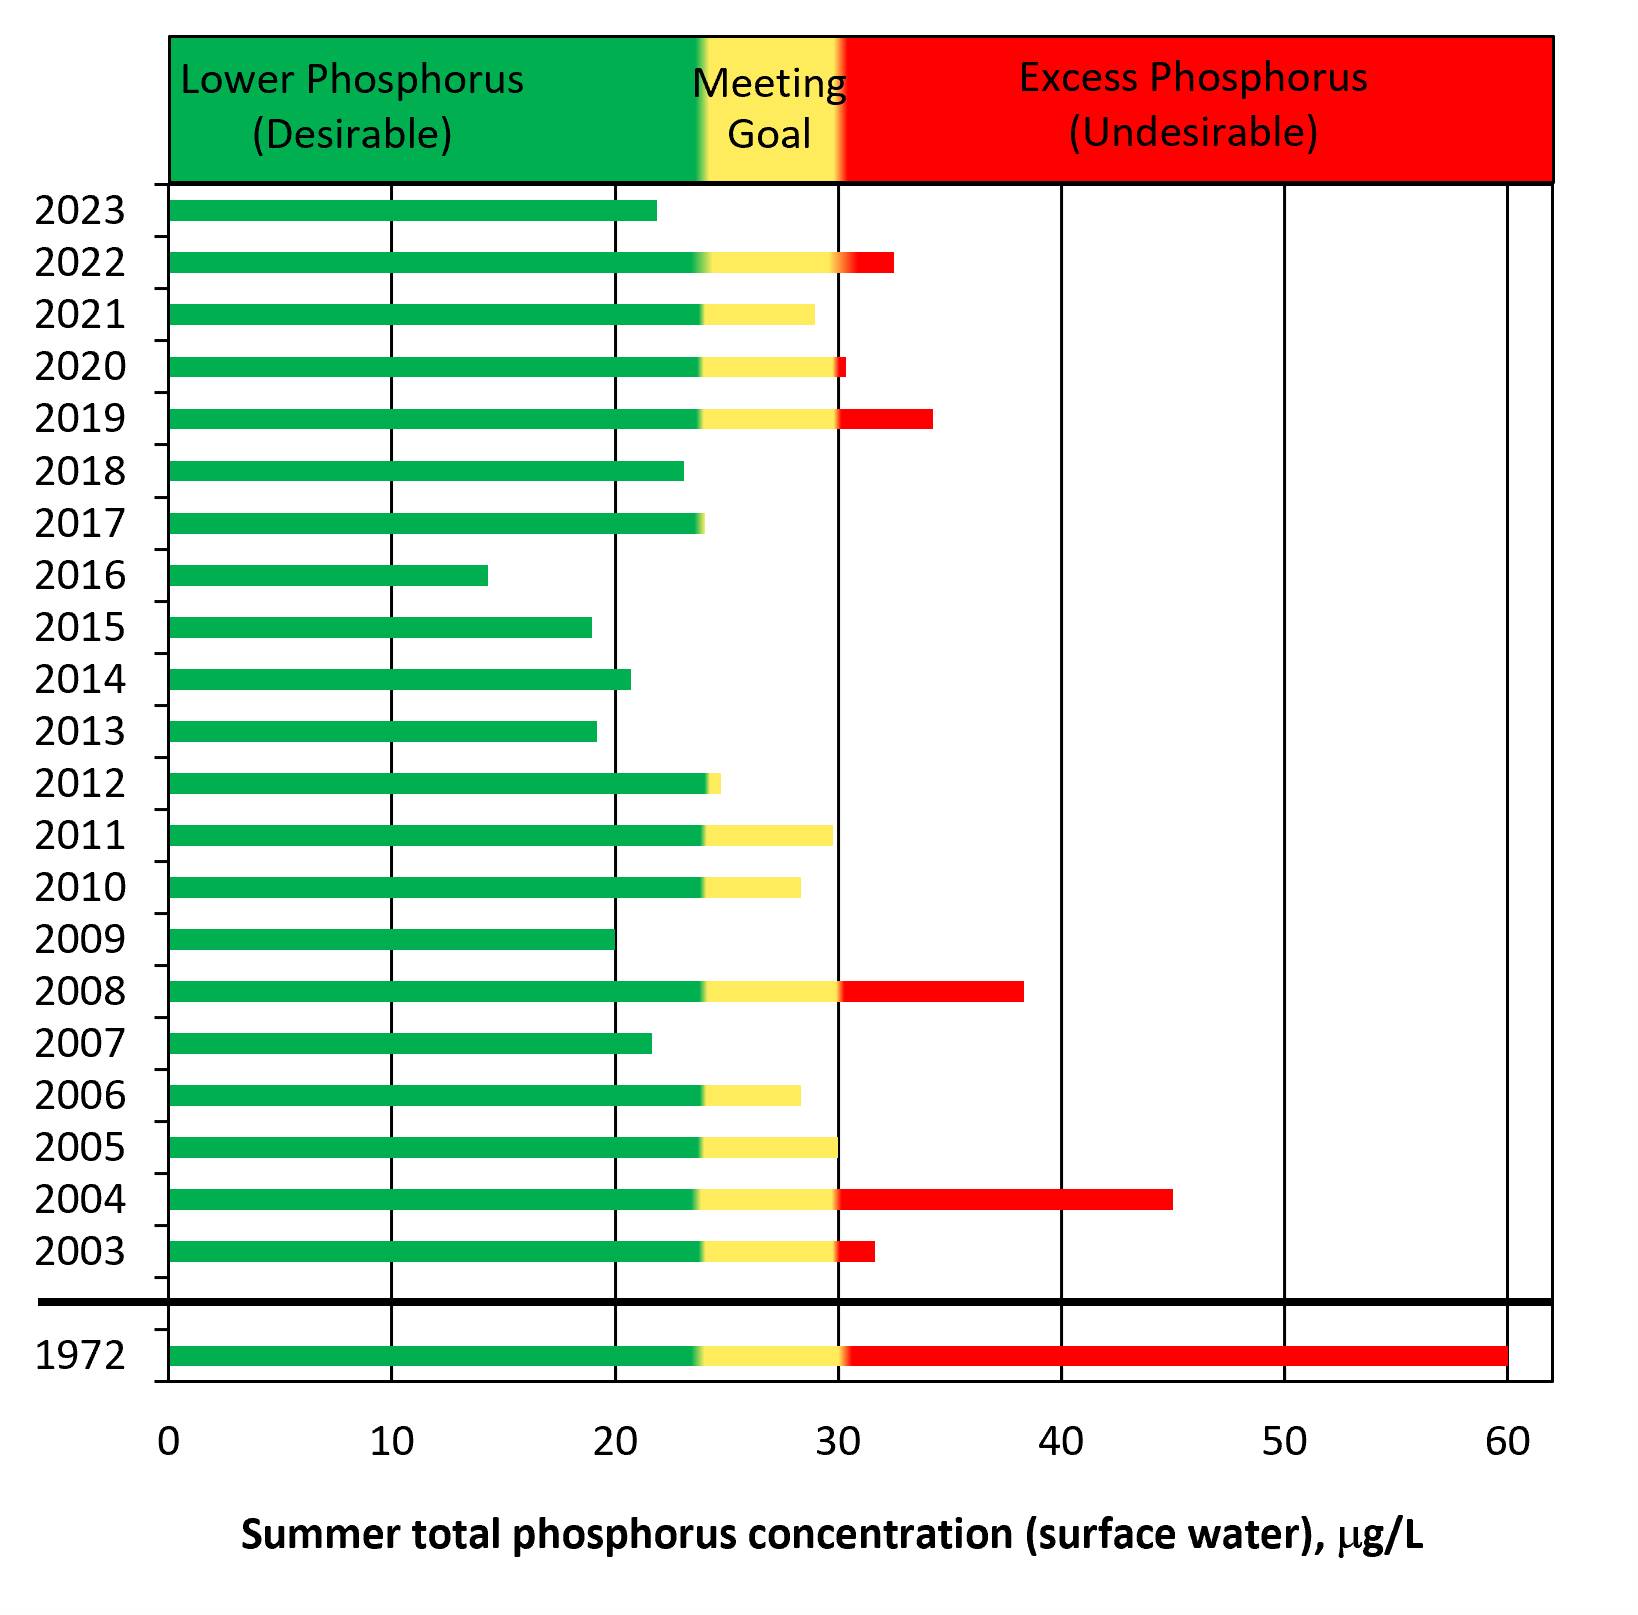 2003-present sampling has ranged between desirable, meeting goal, and undesirable values; 2023 summer TP decreased from 2022.